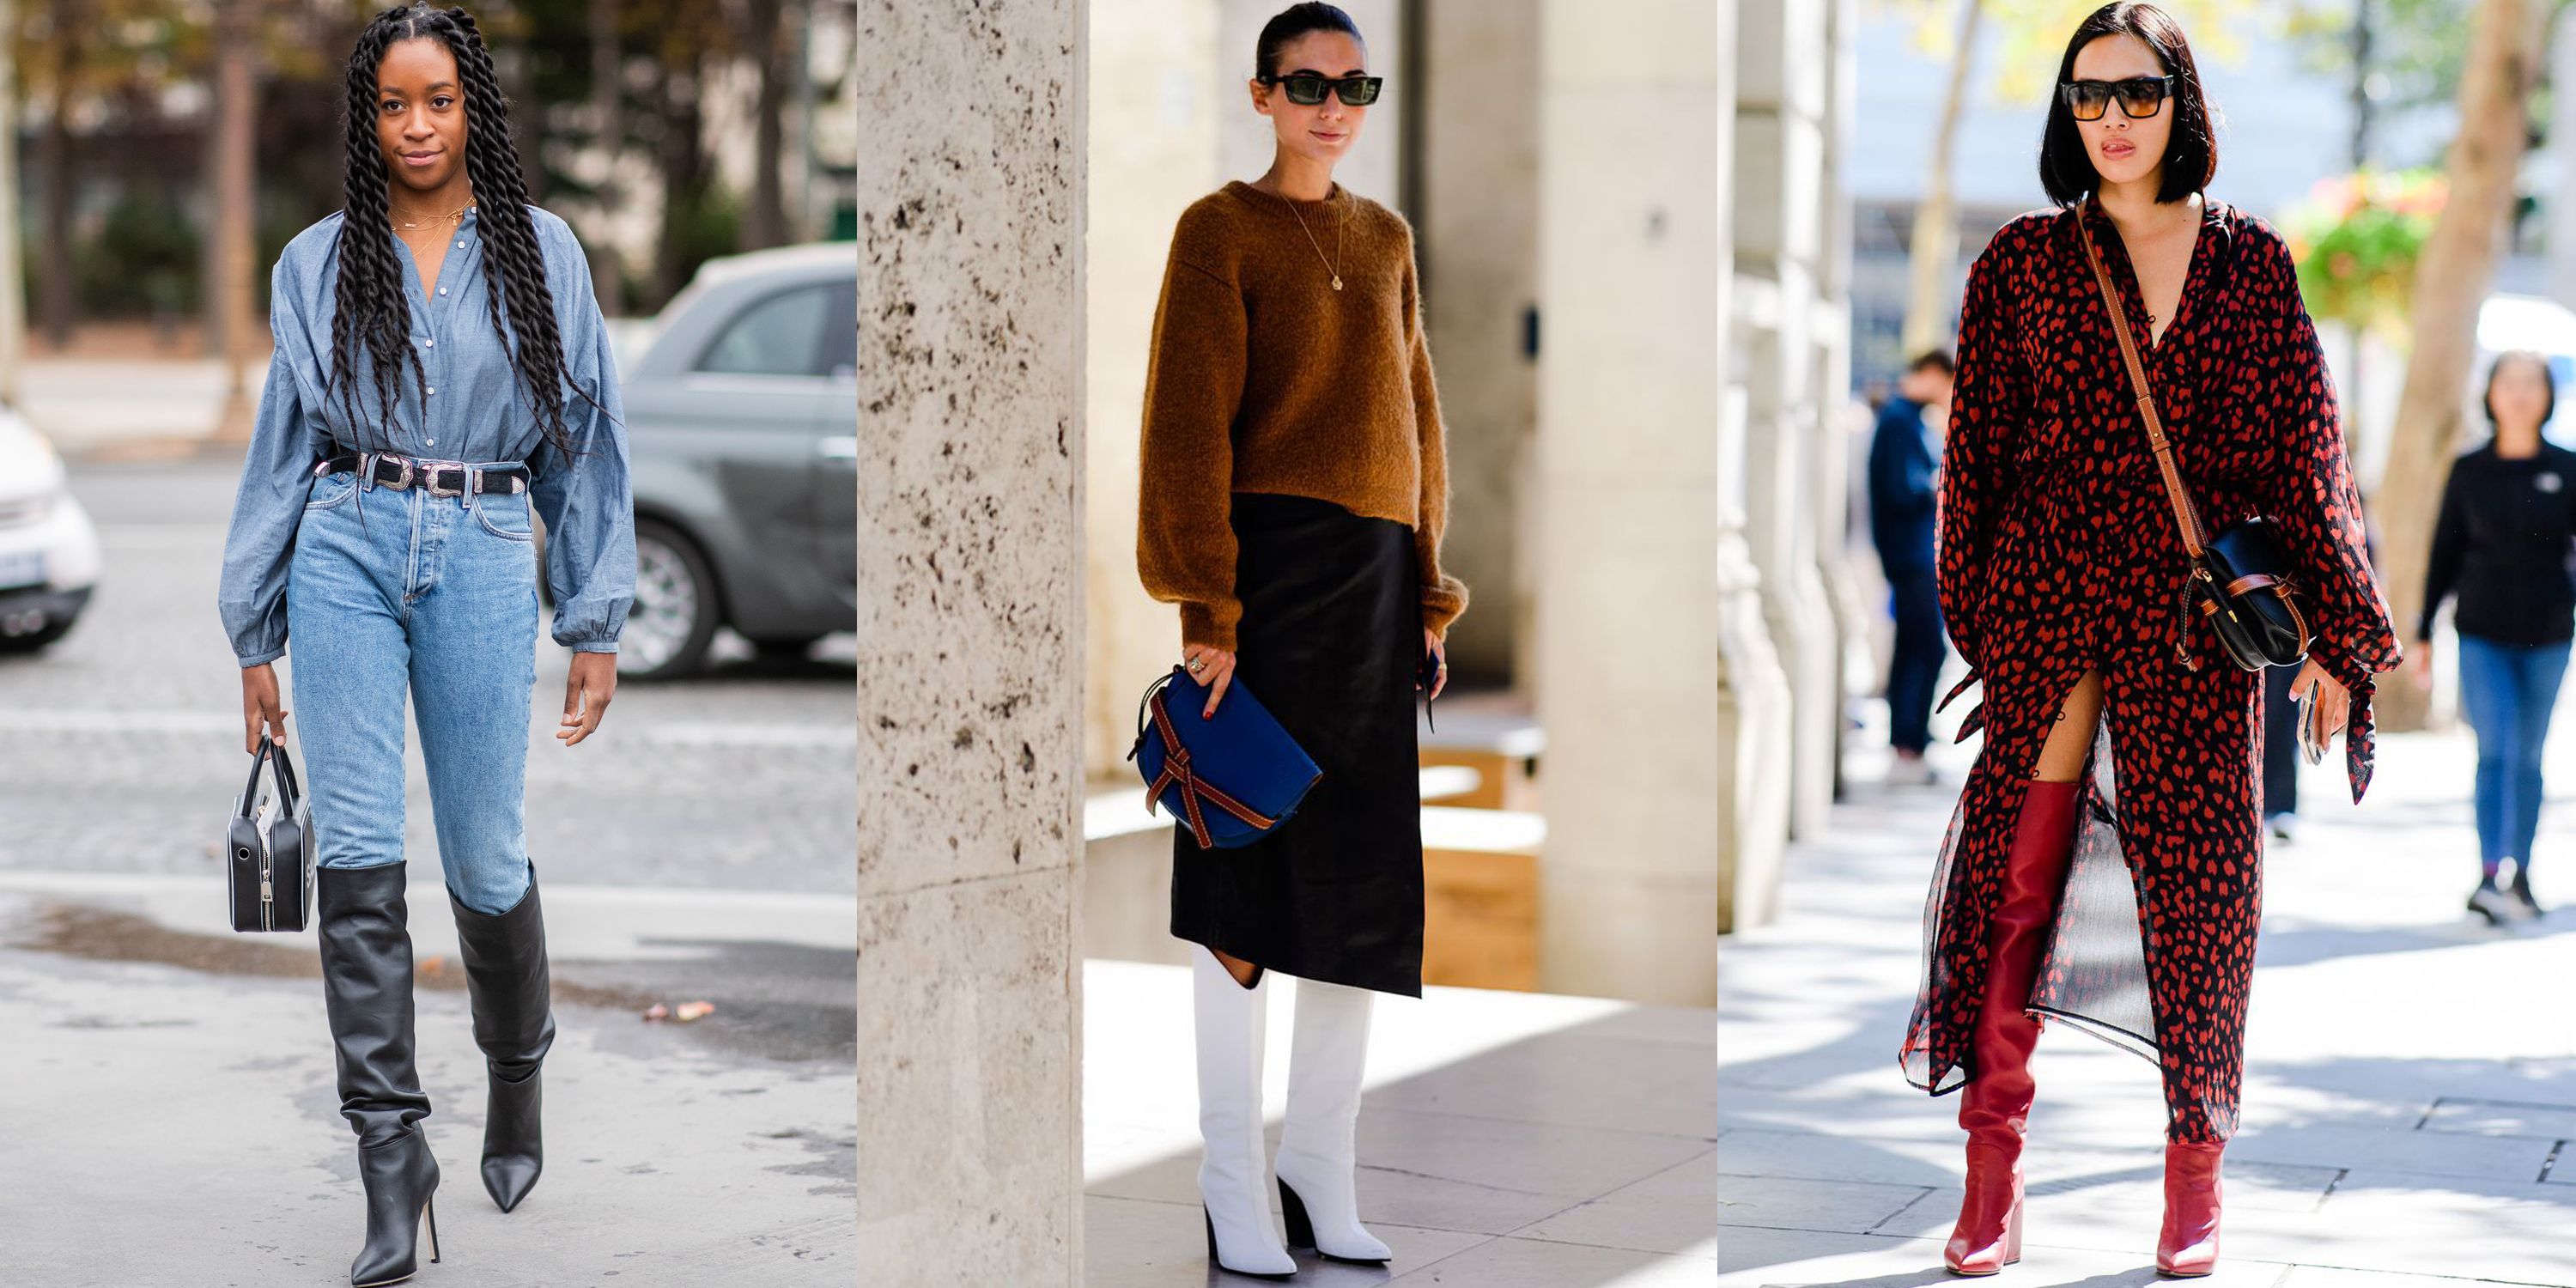 43 Pieces Of Stylish Winter Clothing You'll Love